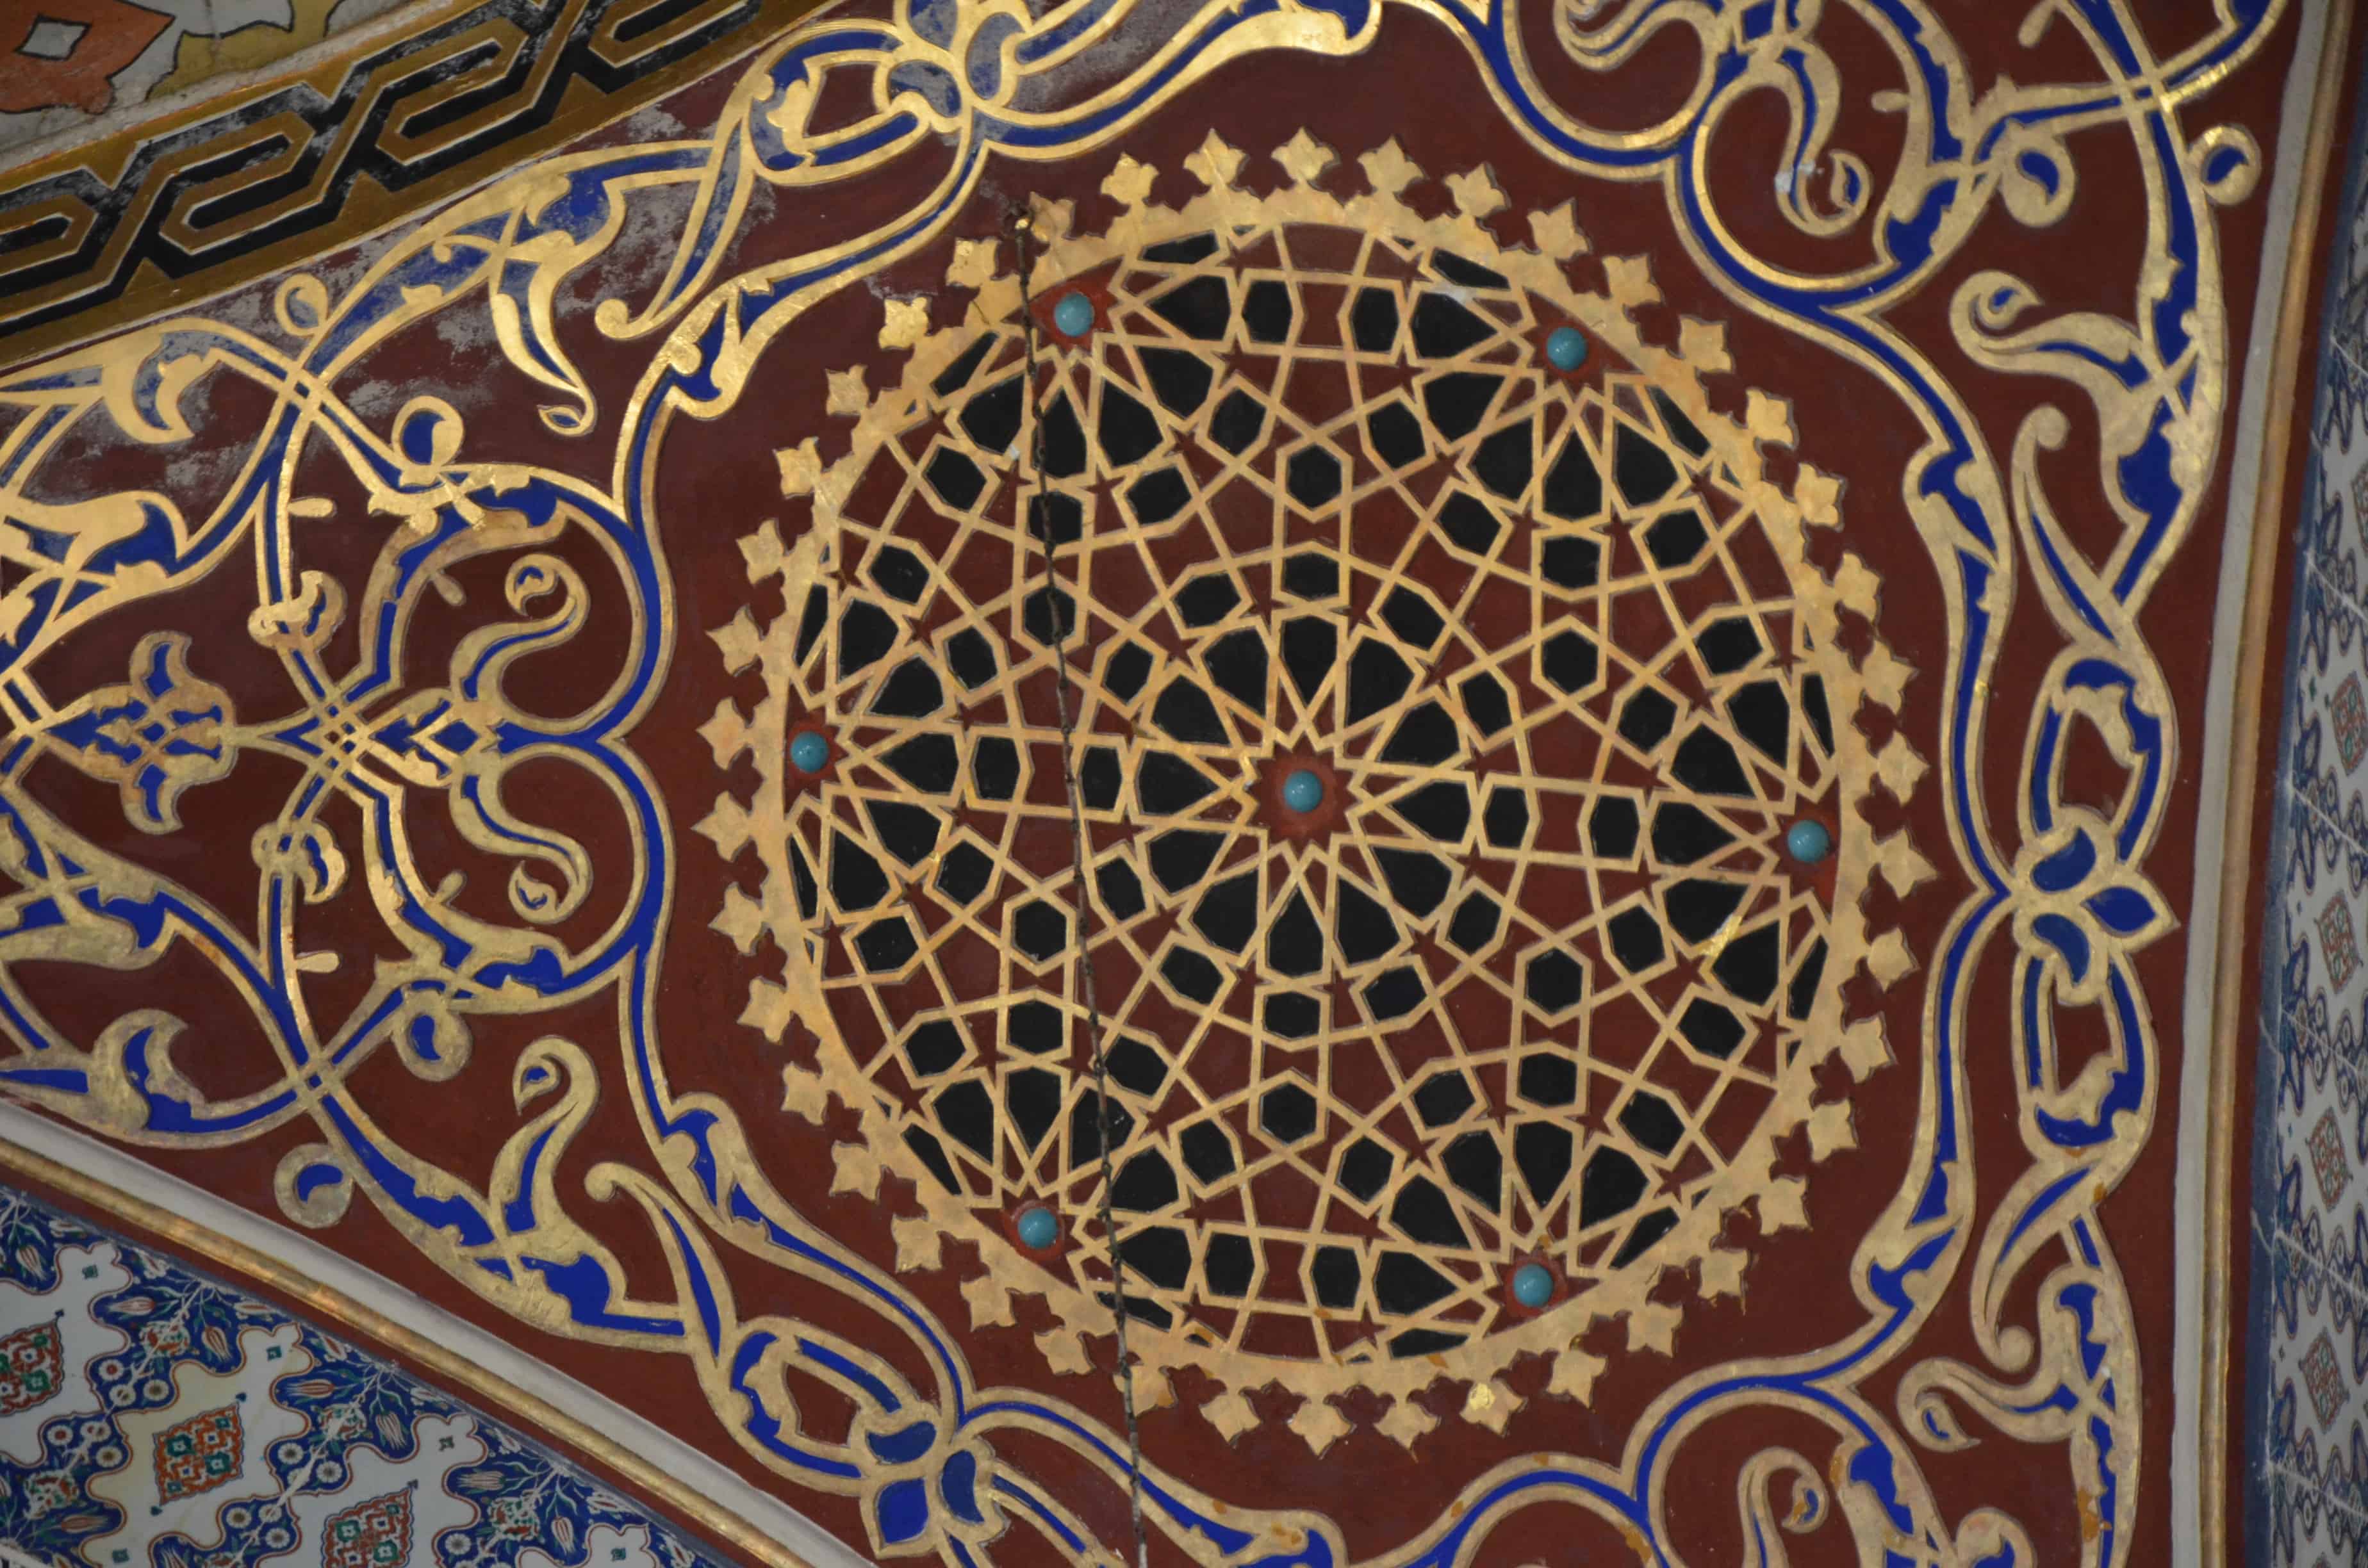 Geometric designs in the Privy Chamber of Murad III in the Imperial Harem at Topkapi Palace in Istanbul, Turkey